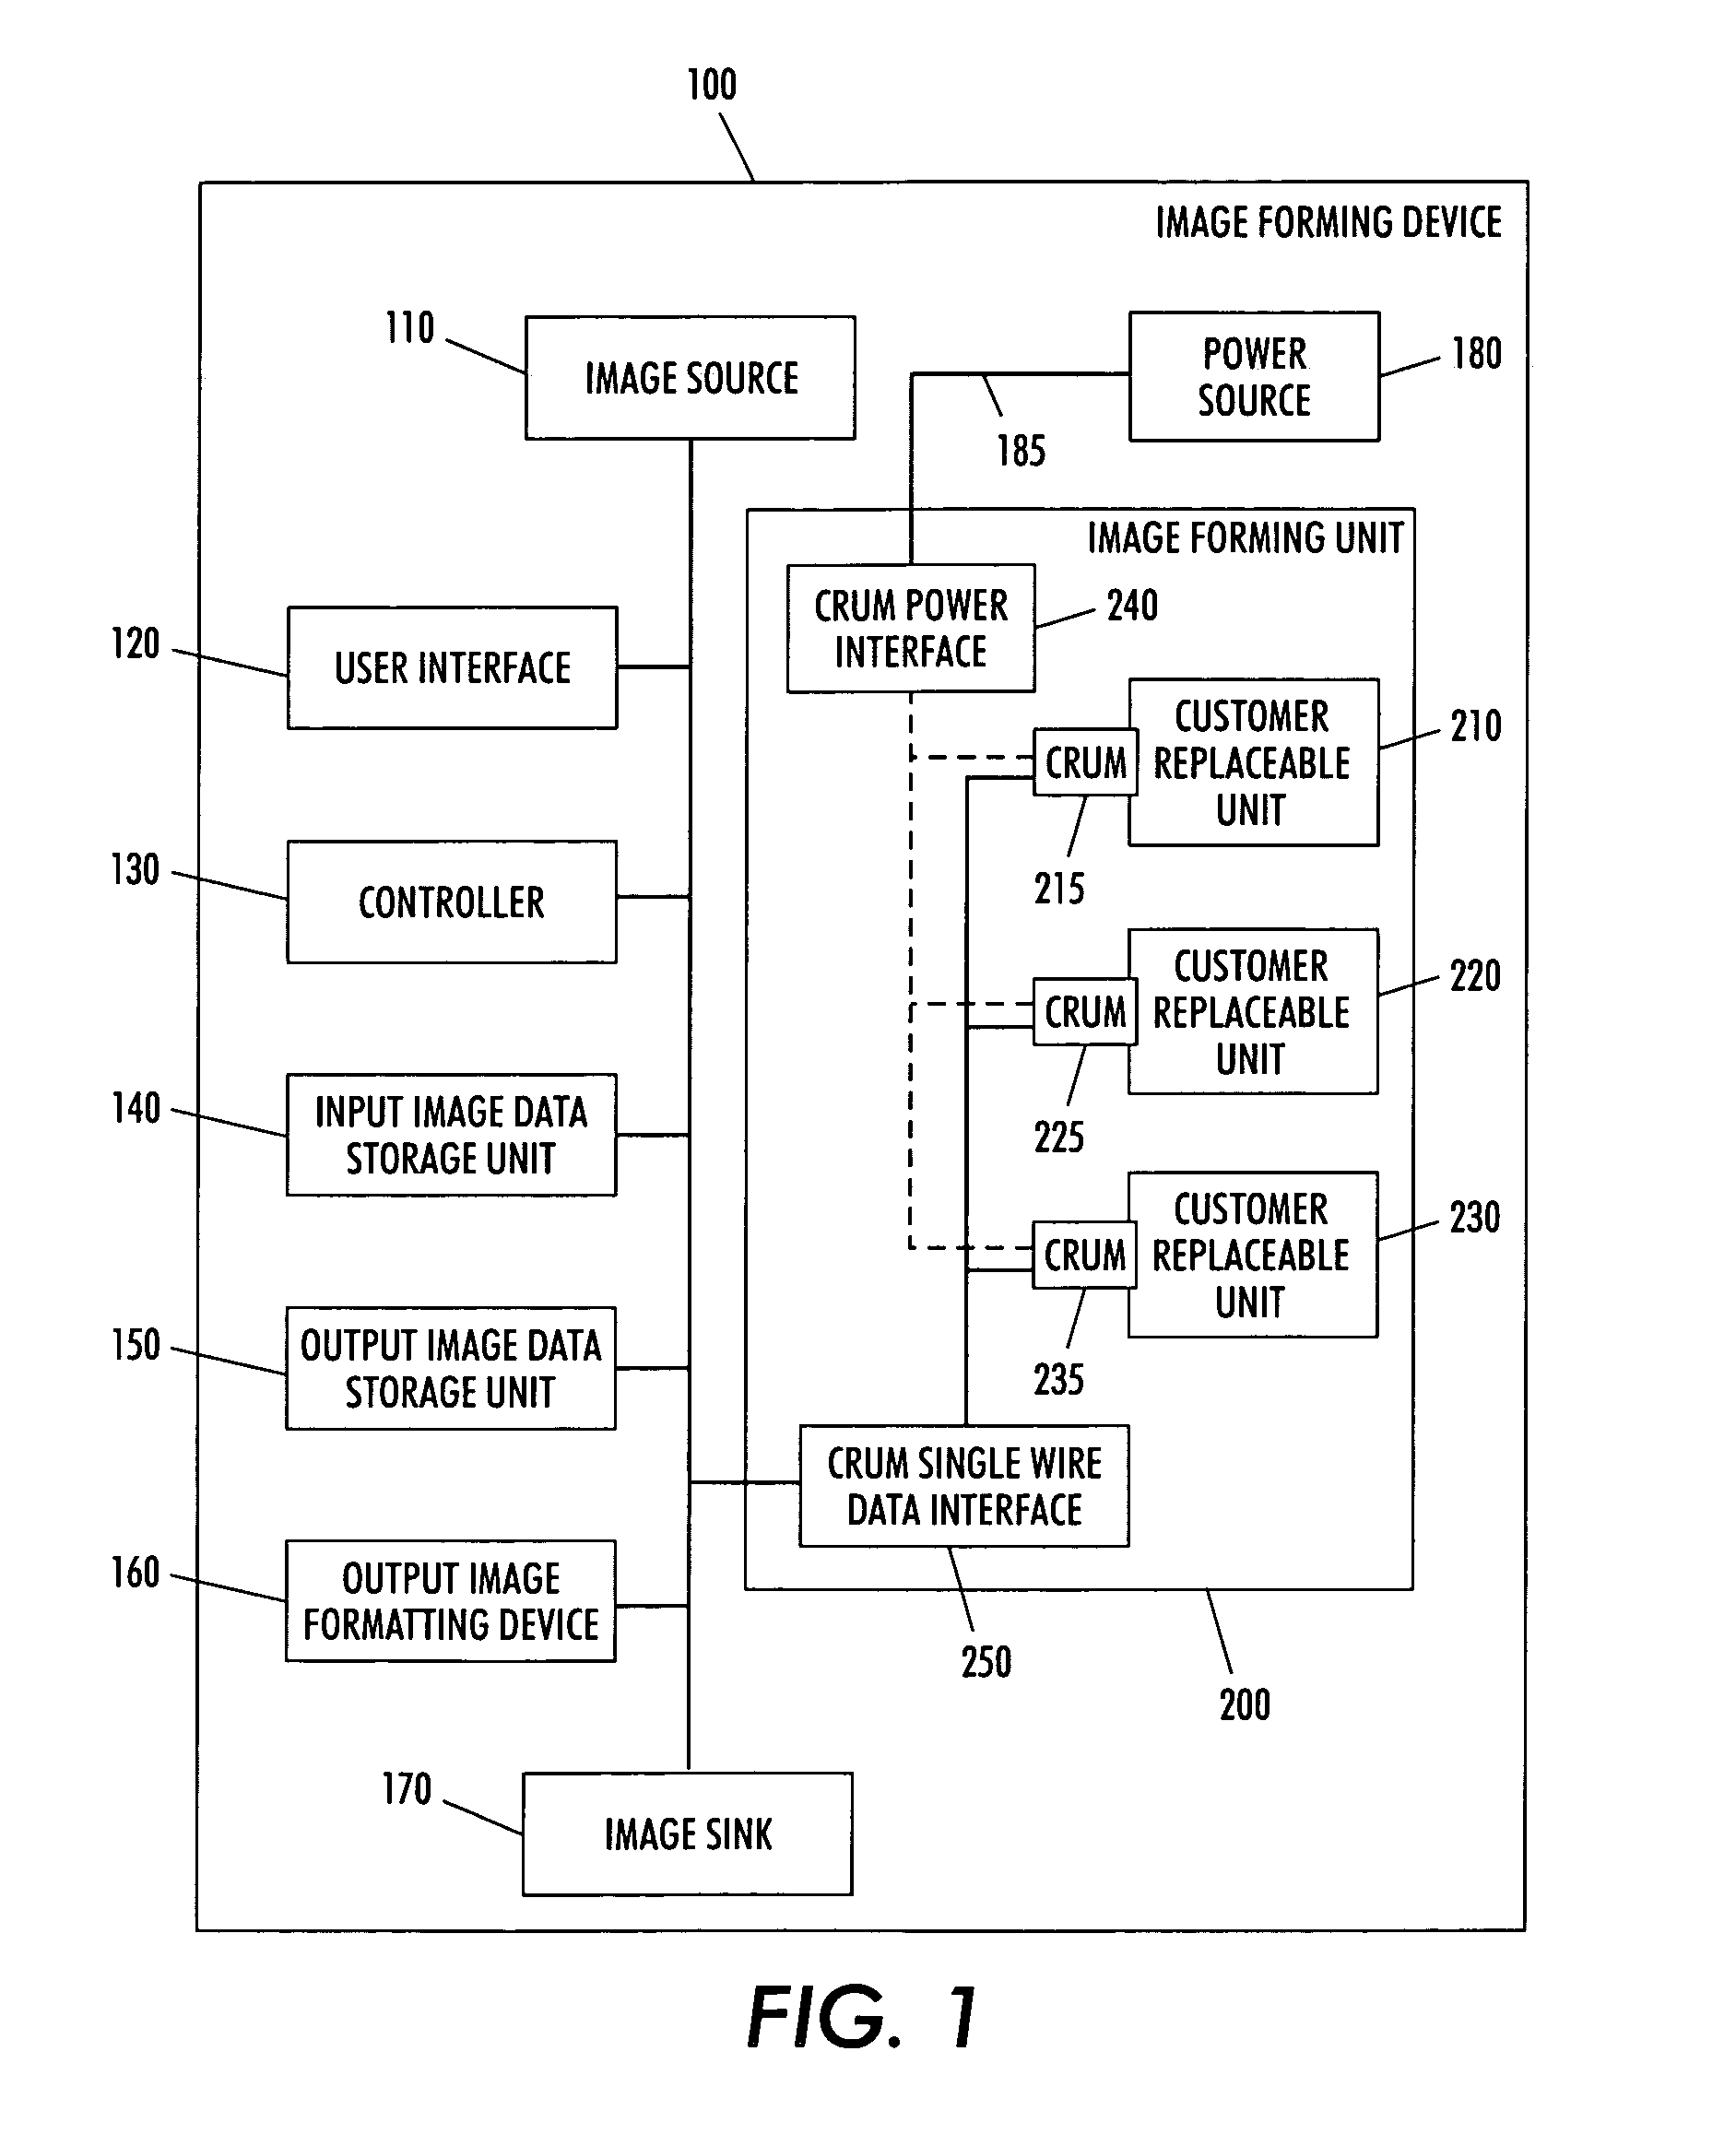 Systems and methods for single wire communication and interaction with a customer replaceable unit monitor